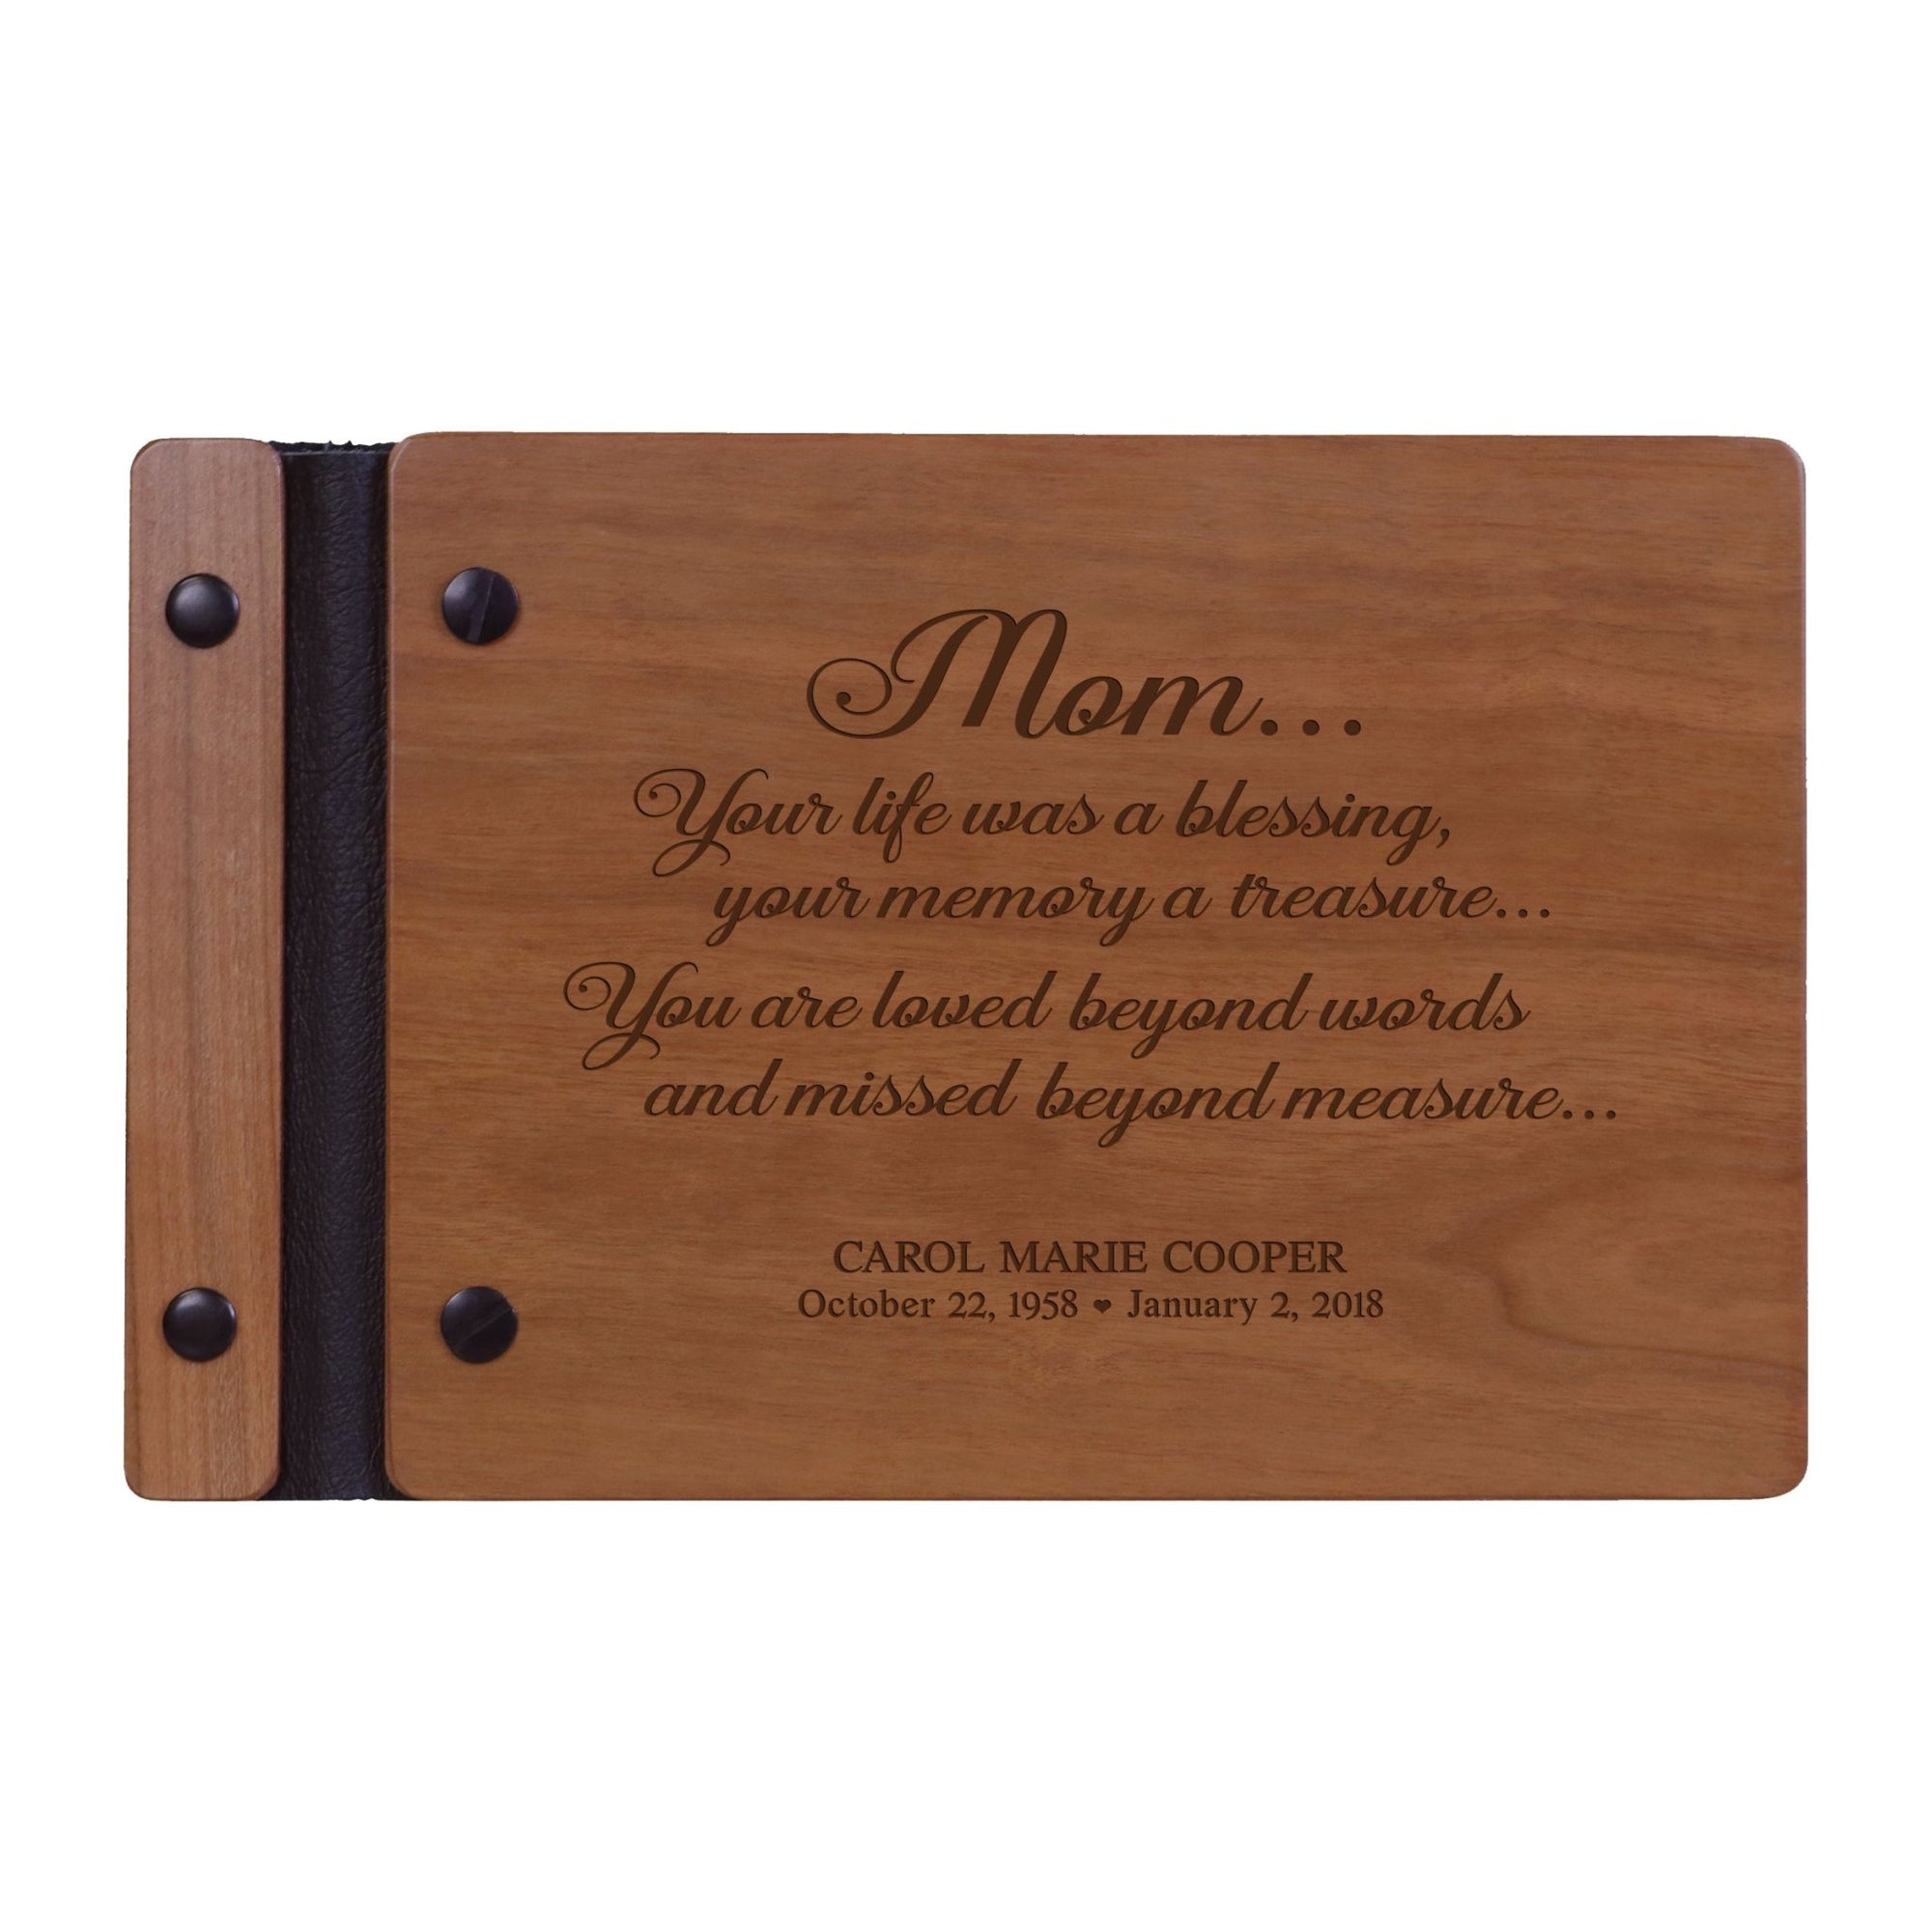 Personalized Memorial Guest Book - Mom - LifeSong Milestones